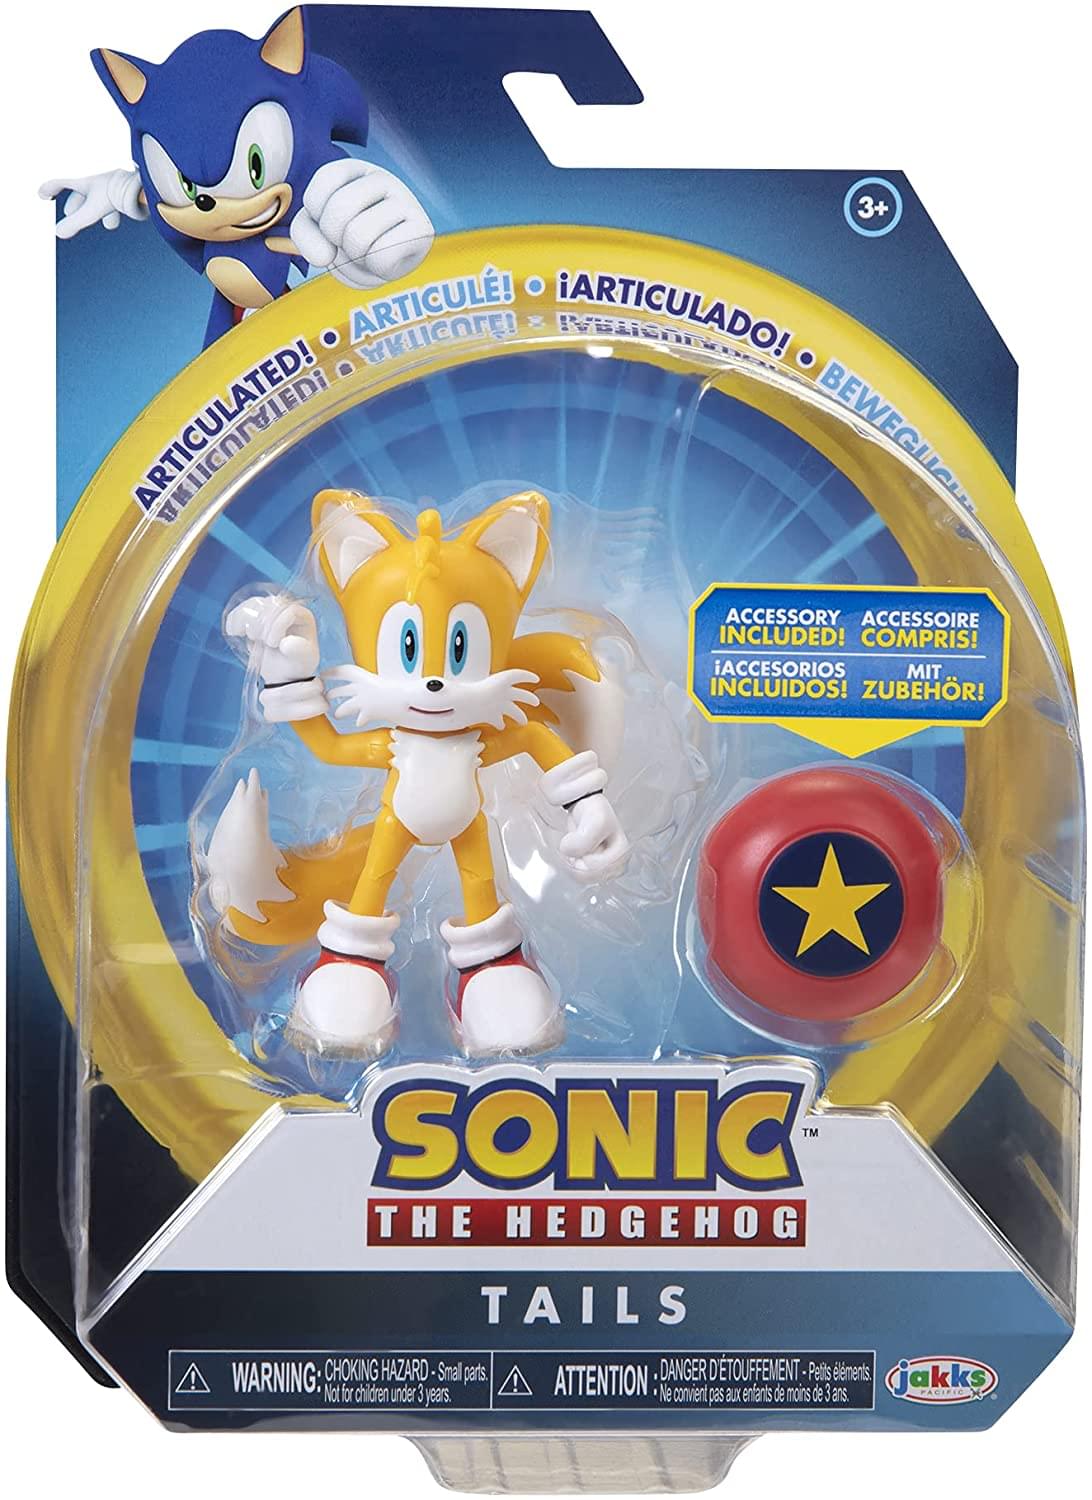 SONIC THE HEDGEHOG TOMY 3 ACTION FIGURE Knuckles Tails Movie Sonic READ